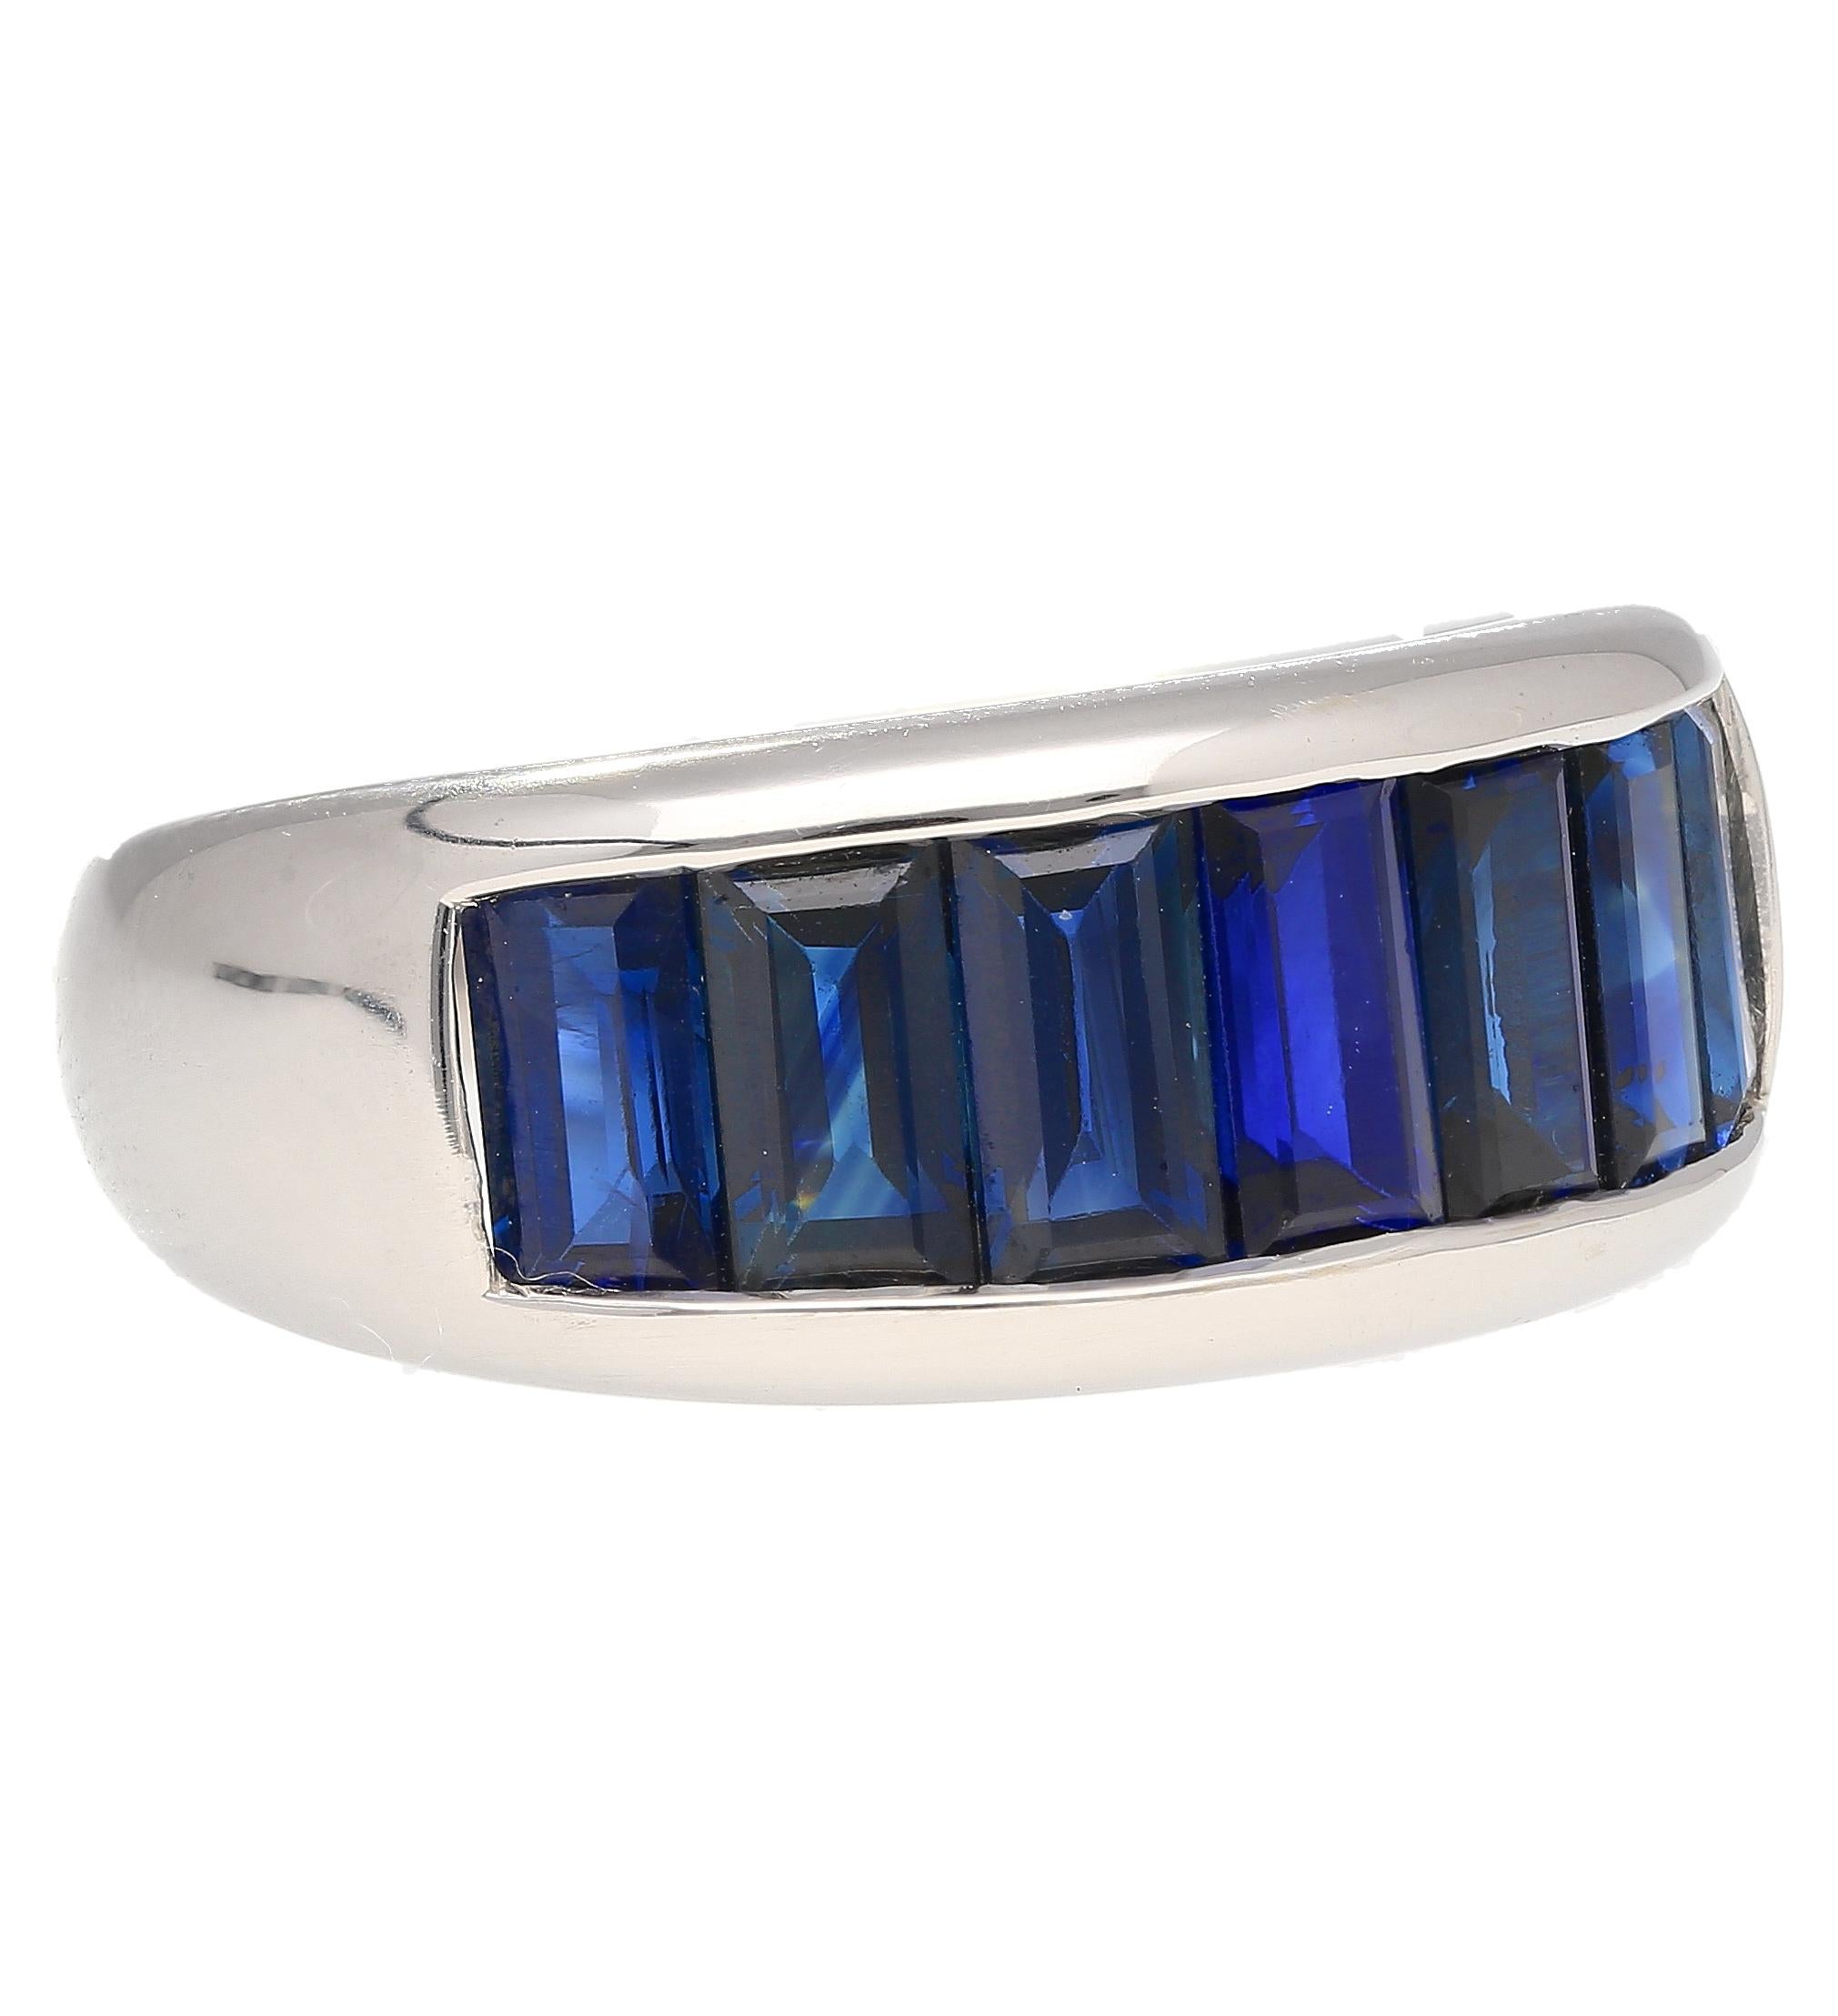 18k solid white gold sets this stunning natural baguette cut Blue Sapphire ring. The sapphires are channel tension set, with a seamless design that offers a glorious hall of mirrors effect when worn on the finger. Each sapphire features a vivid blue